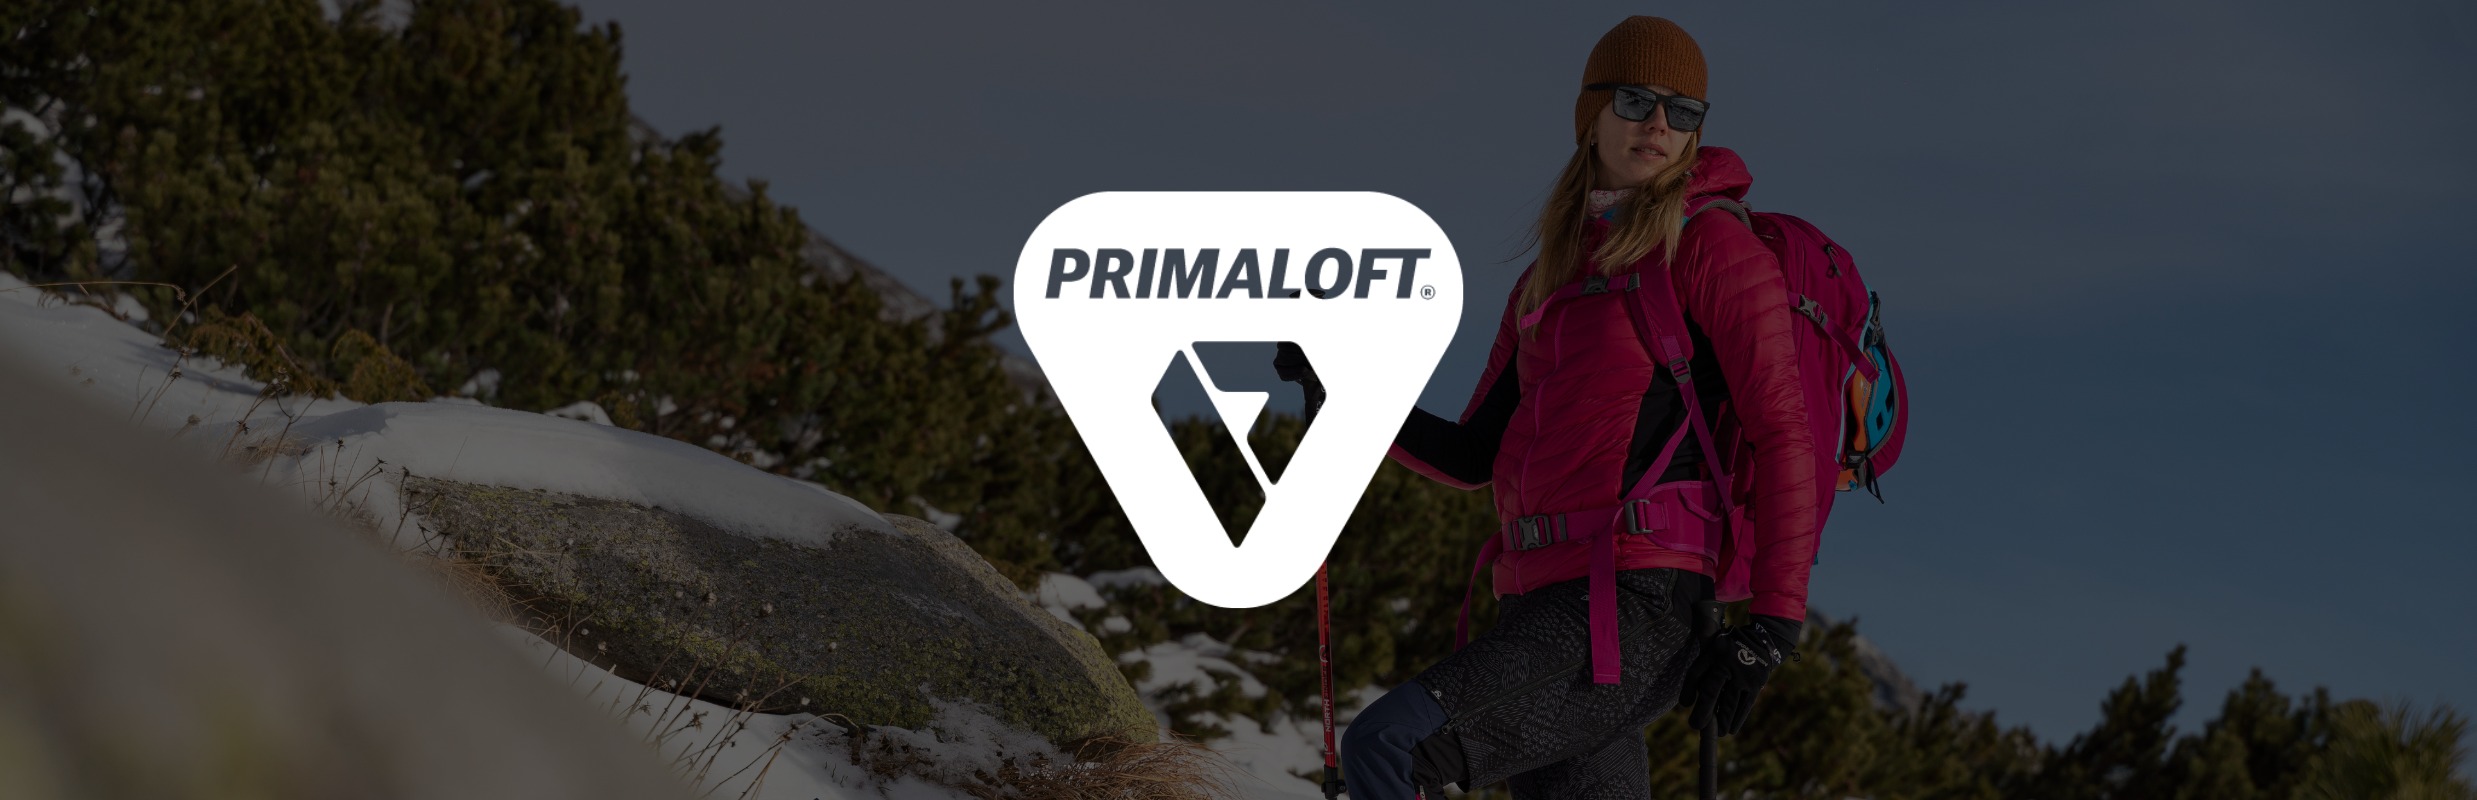 PrimaLoft®: Down or synthetic fibres? When choosing an insulating layer, warmth is not the only factor